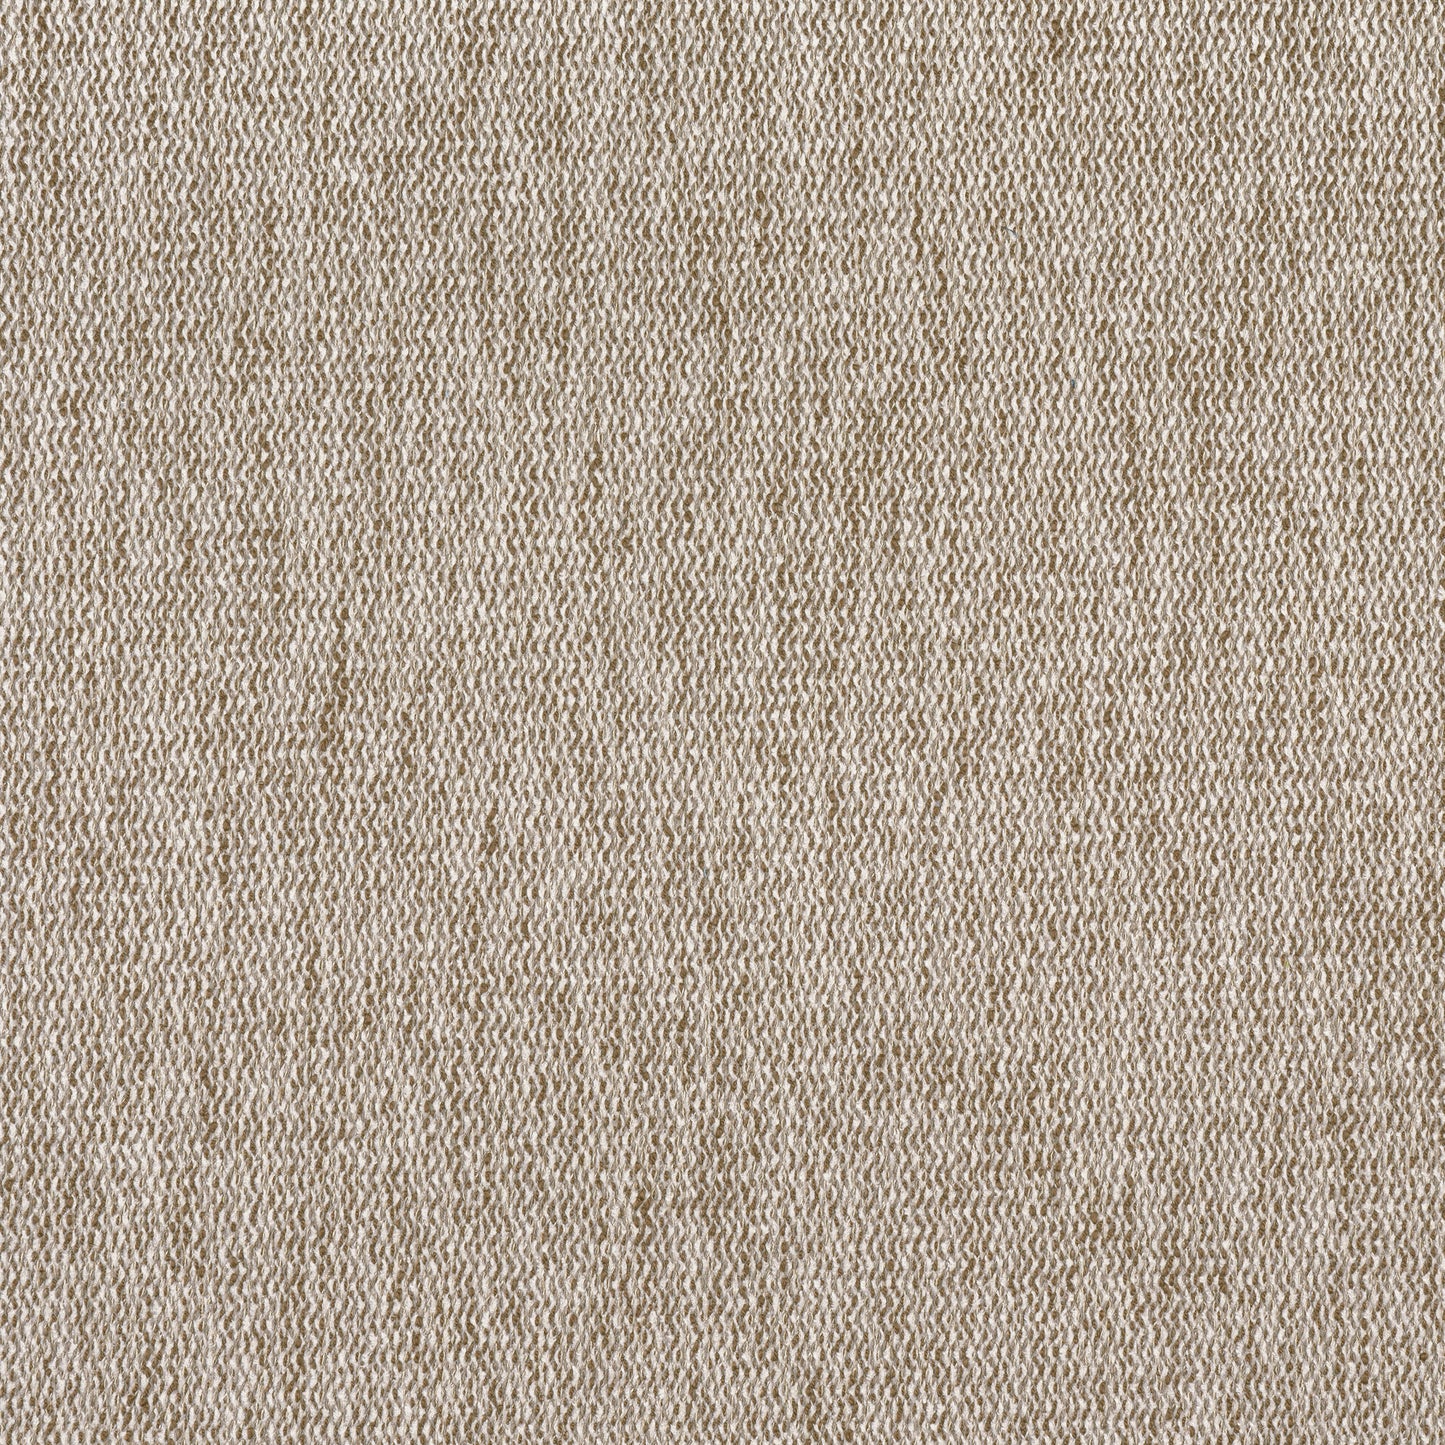 Purchase Thibaut Fabric SKU# W8782 pattern name Arroyo color Latte